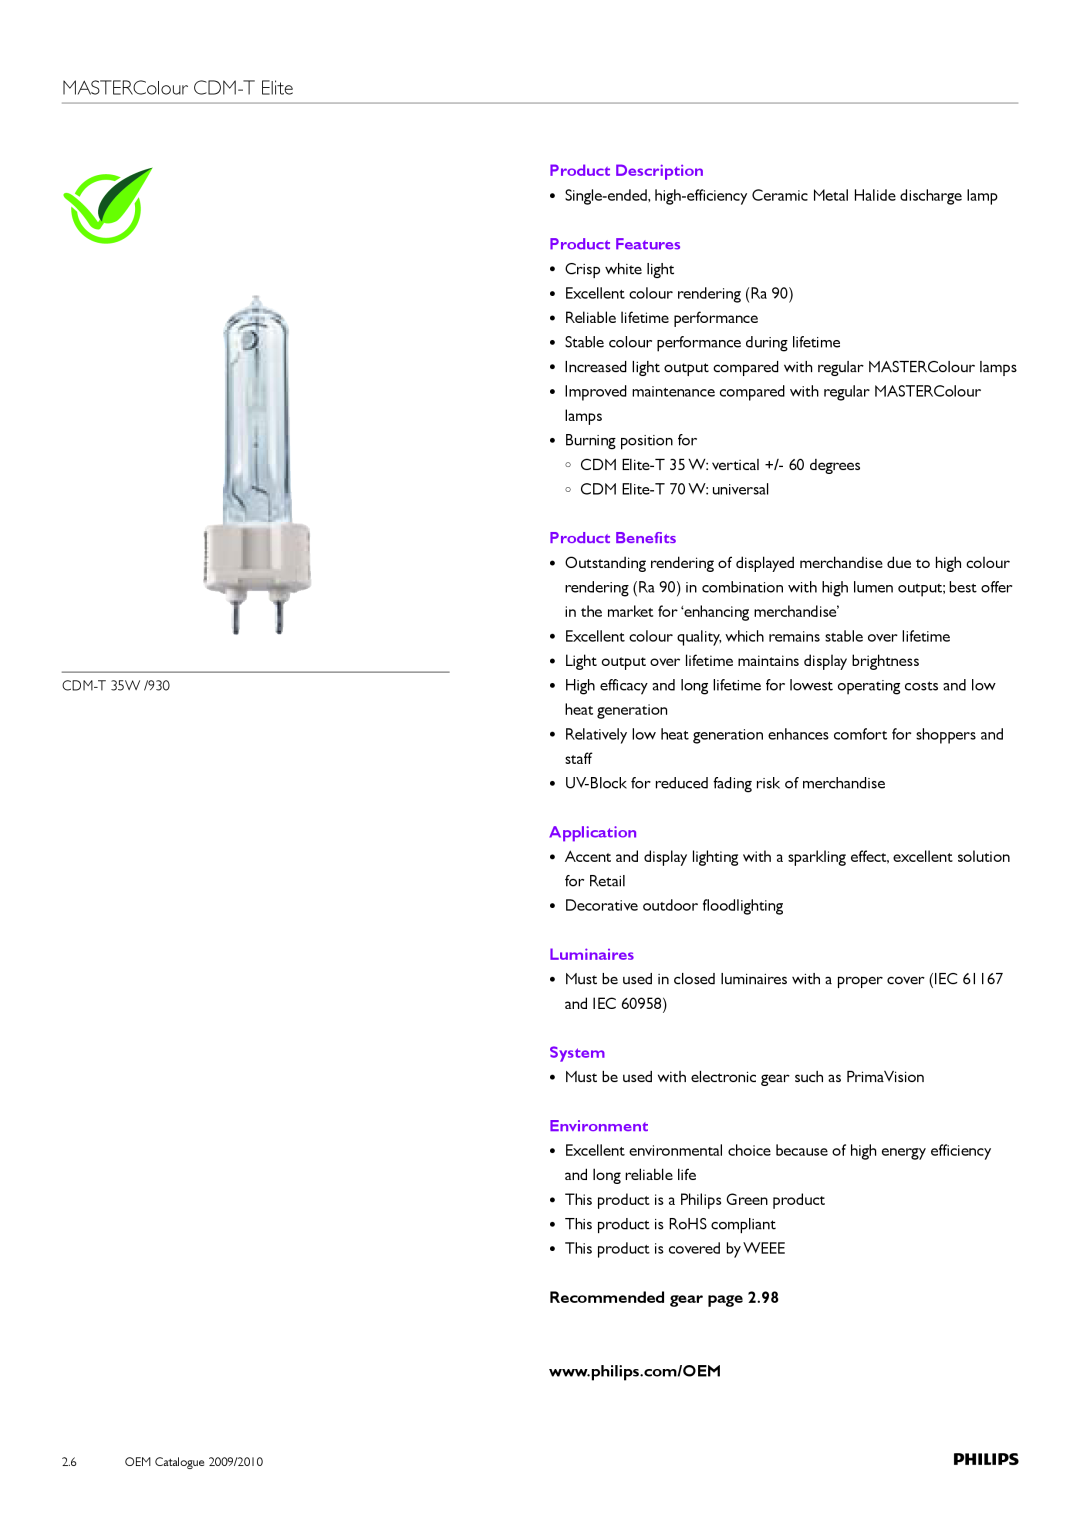 Philips Compact HID Lamp and Gear MASTERColour CDM-TElite, Product Description, Product Features, Product Benefits, System 